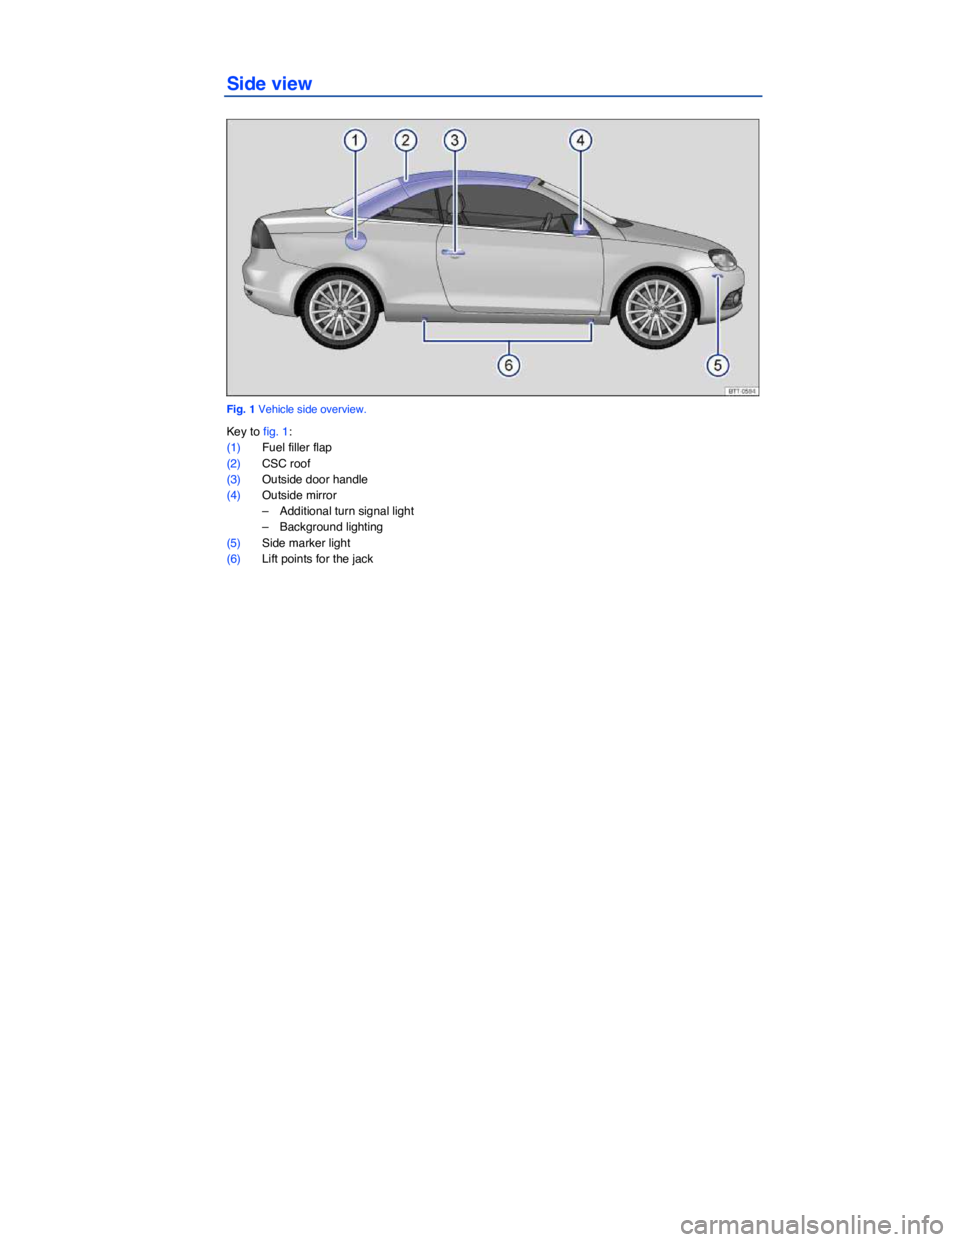 VOLKSWAGEN EOS 2011  Owners Manual  
 
Side view 
 
Fig. 1 Vehicle side overview. 
Key to fig. 1: 
(1) Fuel filler flap  
(2) CSC roof  
(3) Outside door handle  
(4) Outside mirror  
–  Additional turn signal light  
–  Background